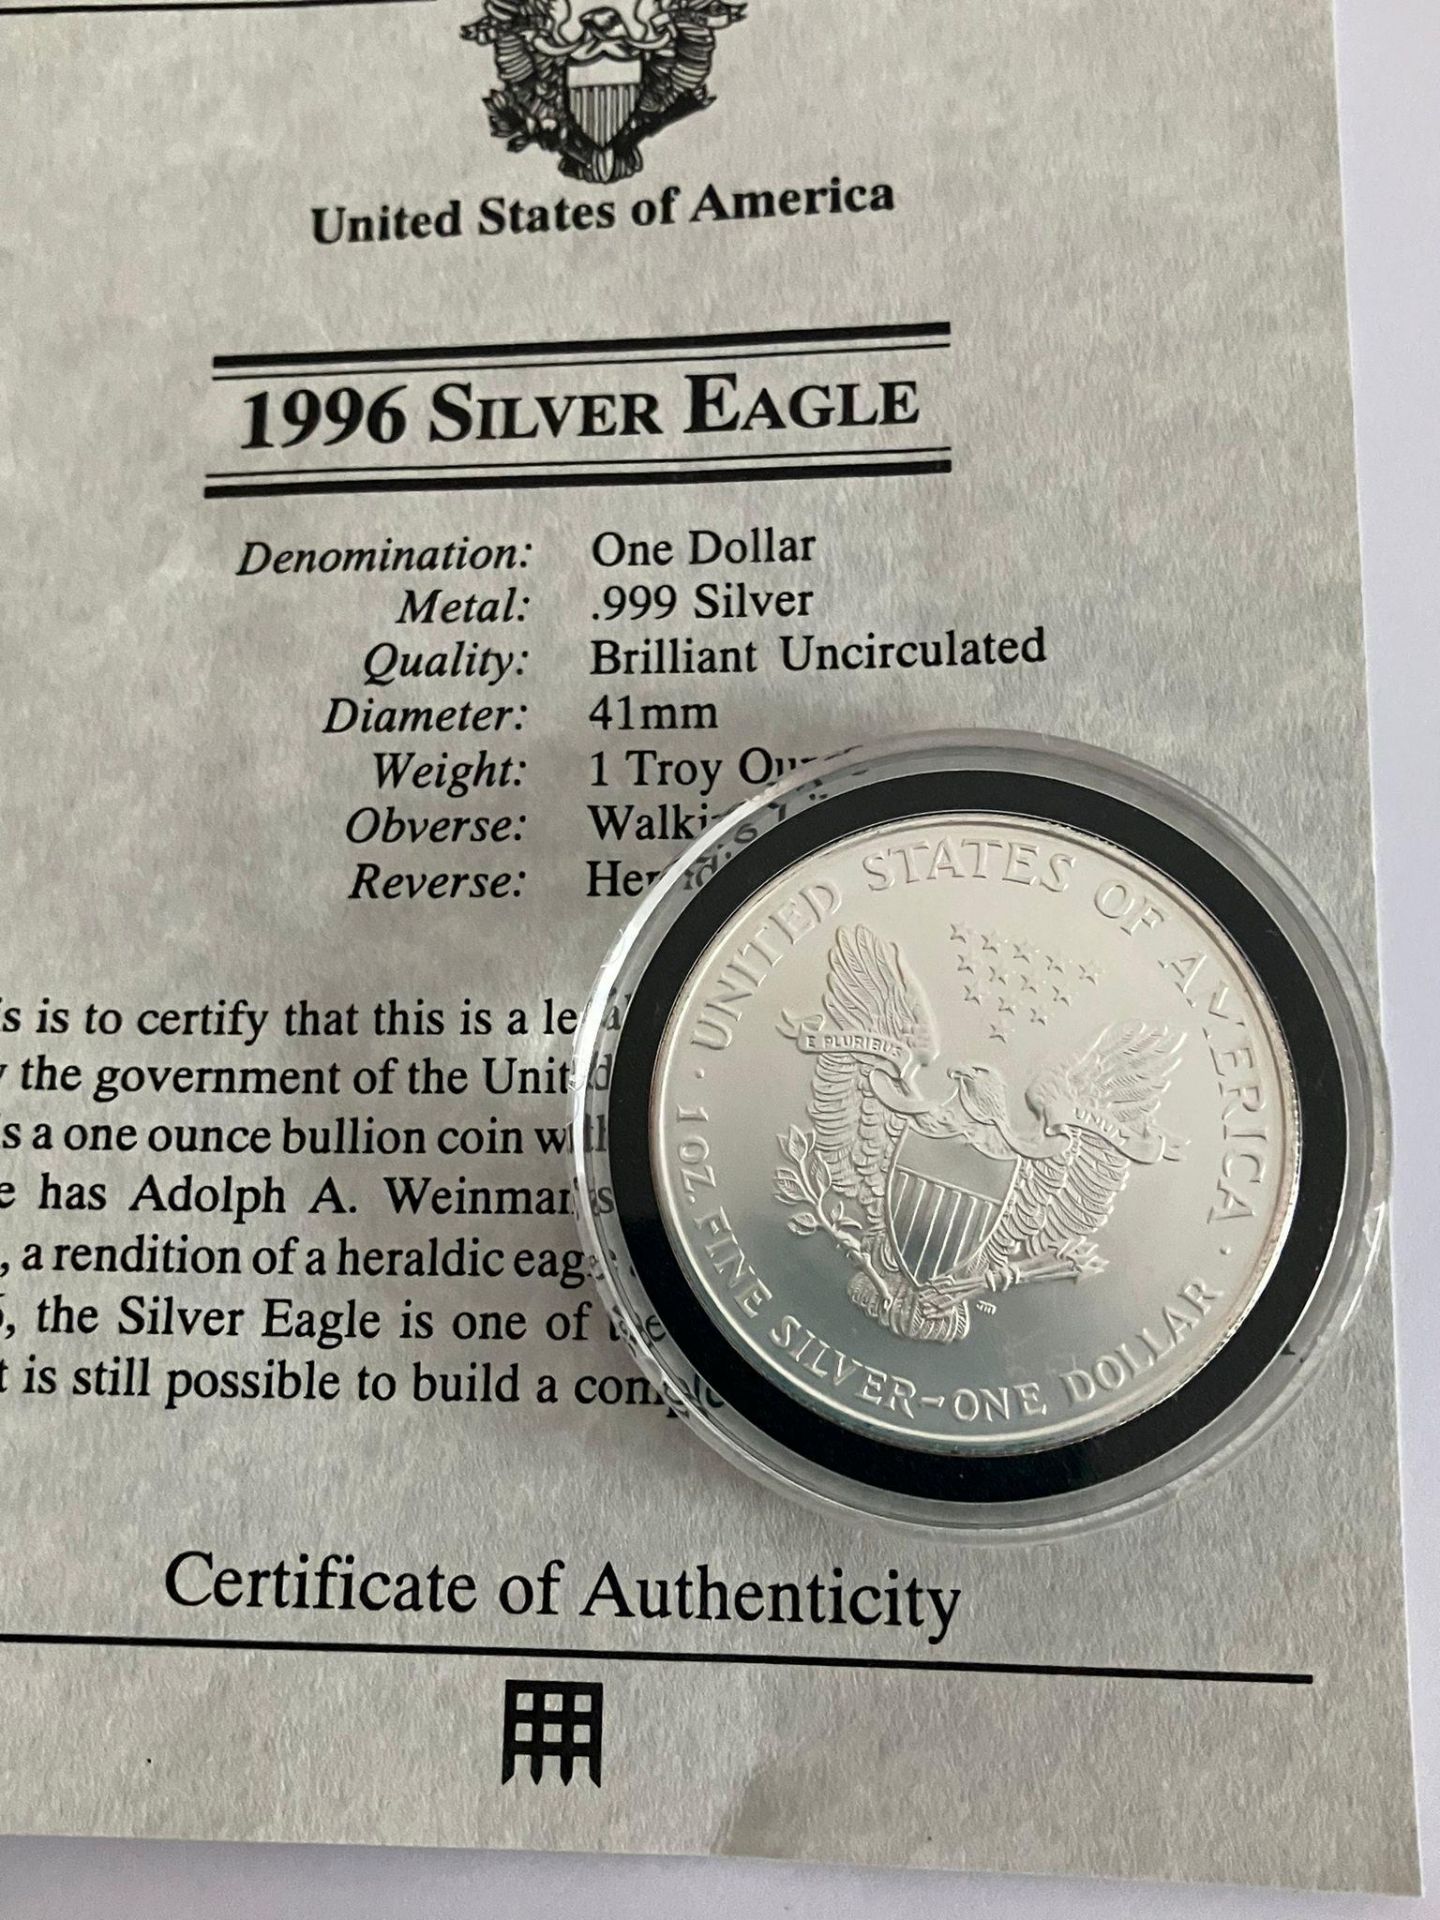 United States PURE SILVER DOLLAR. 1996 Silver Eagle/Walking Lady. Condition new and uncirculated.